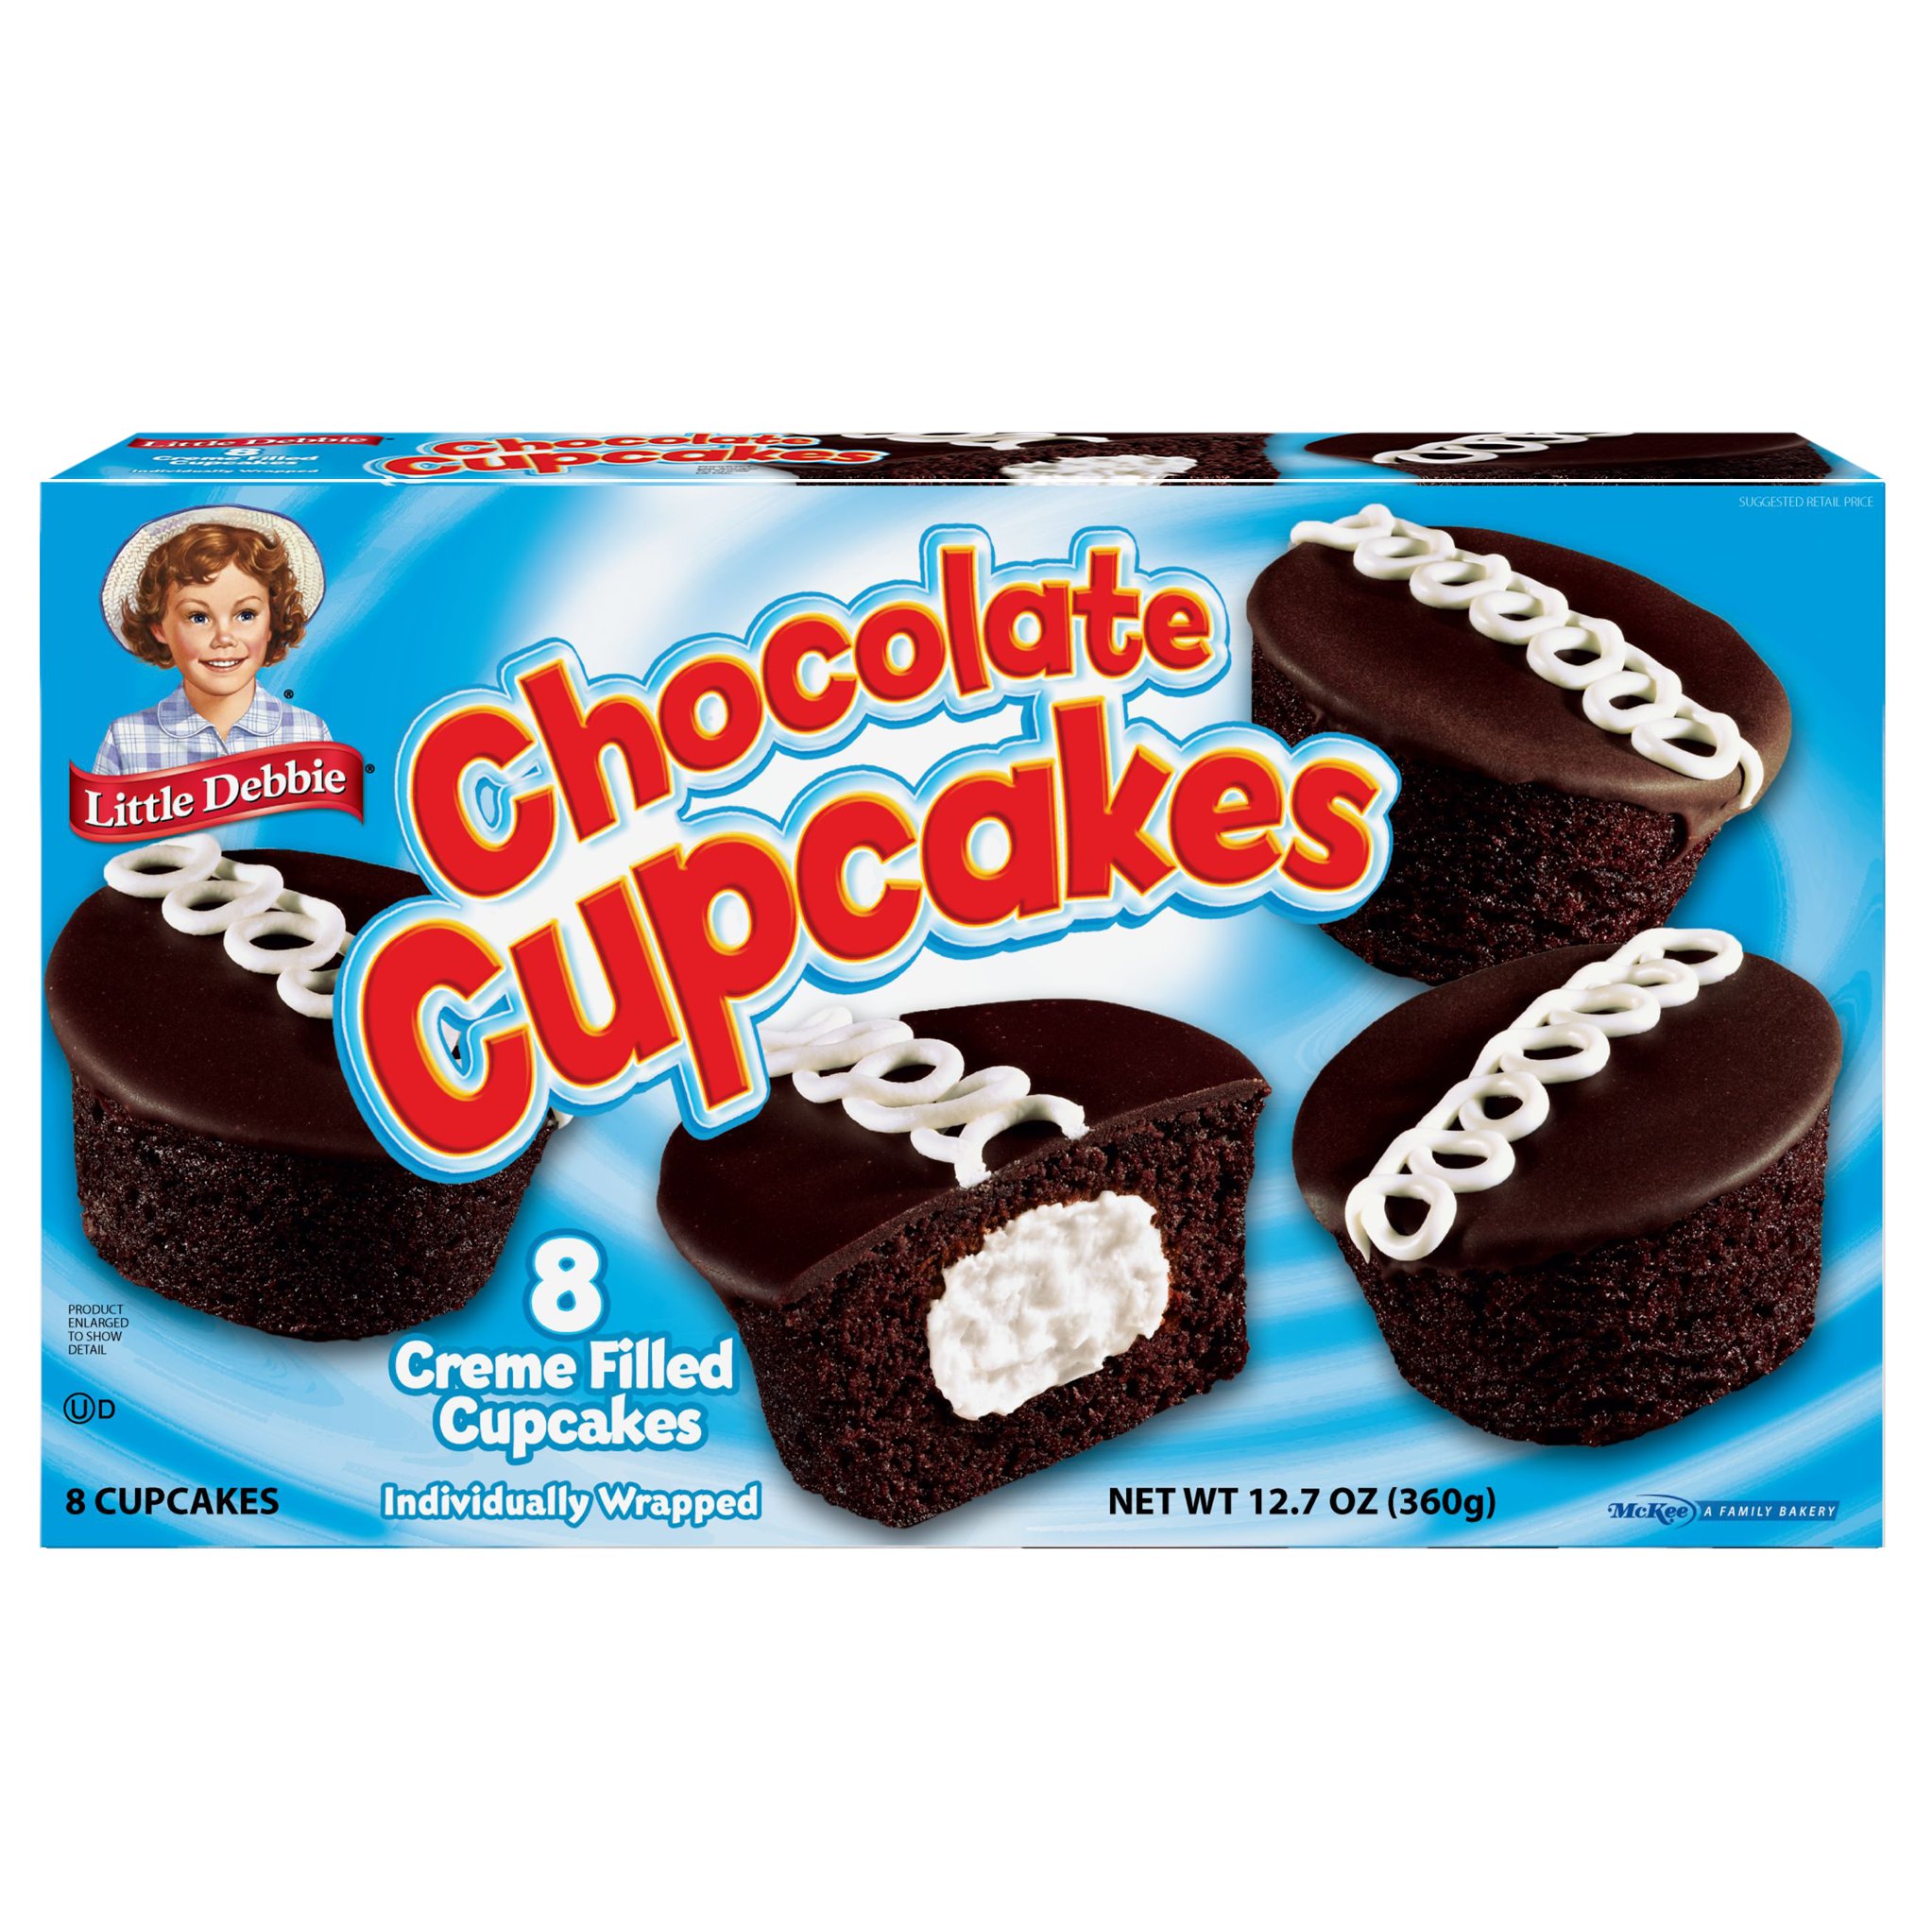 Little Debbie Chocolate Cupcakes - Shop Snack Cakes at H-E-B